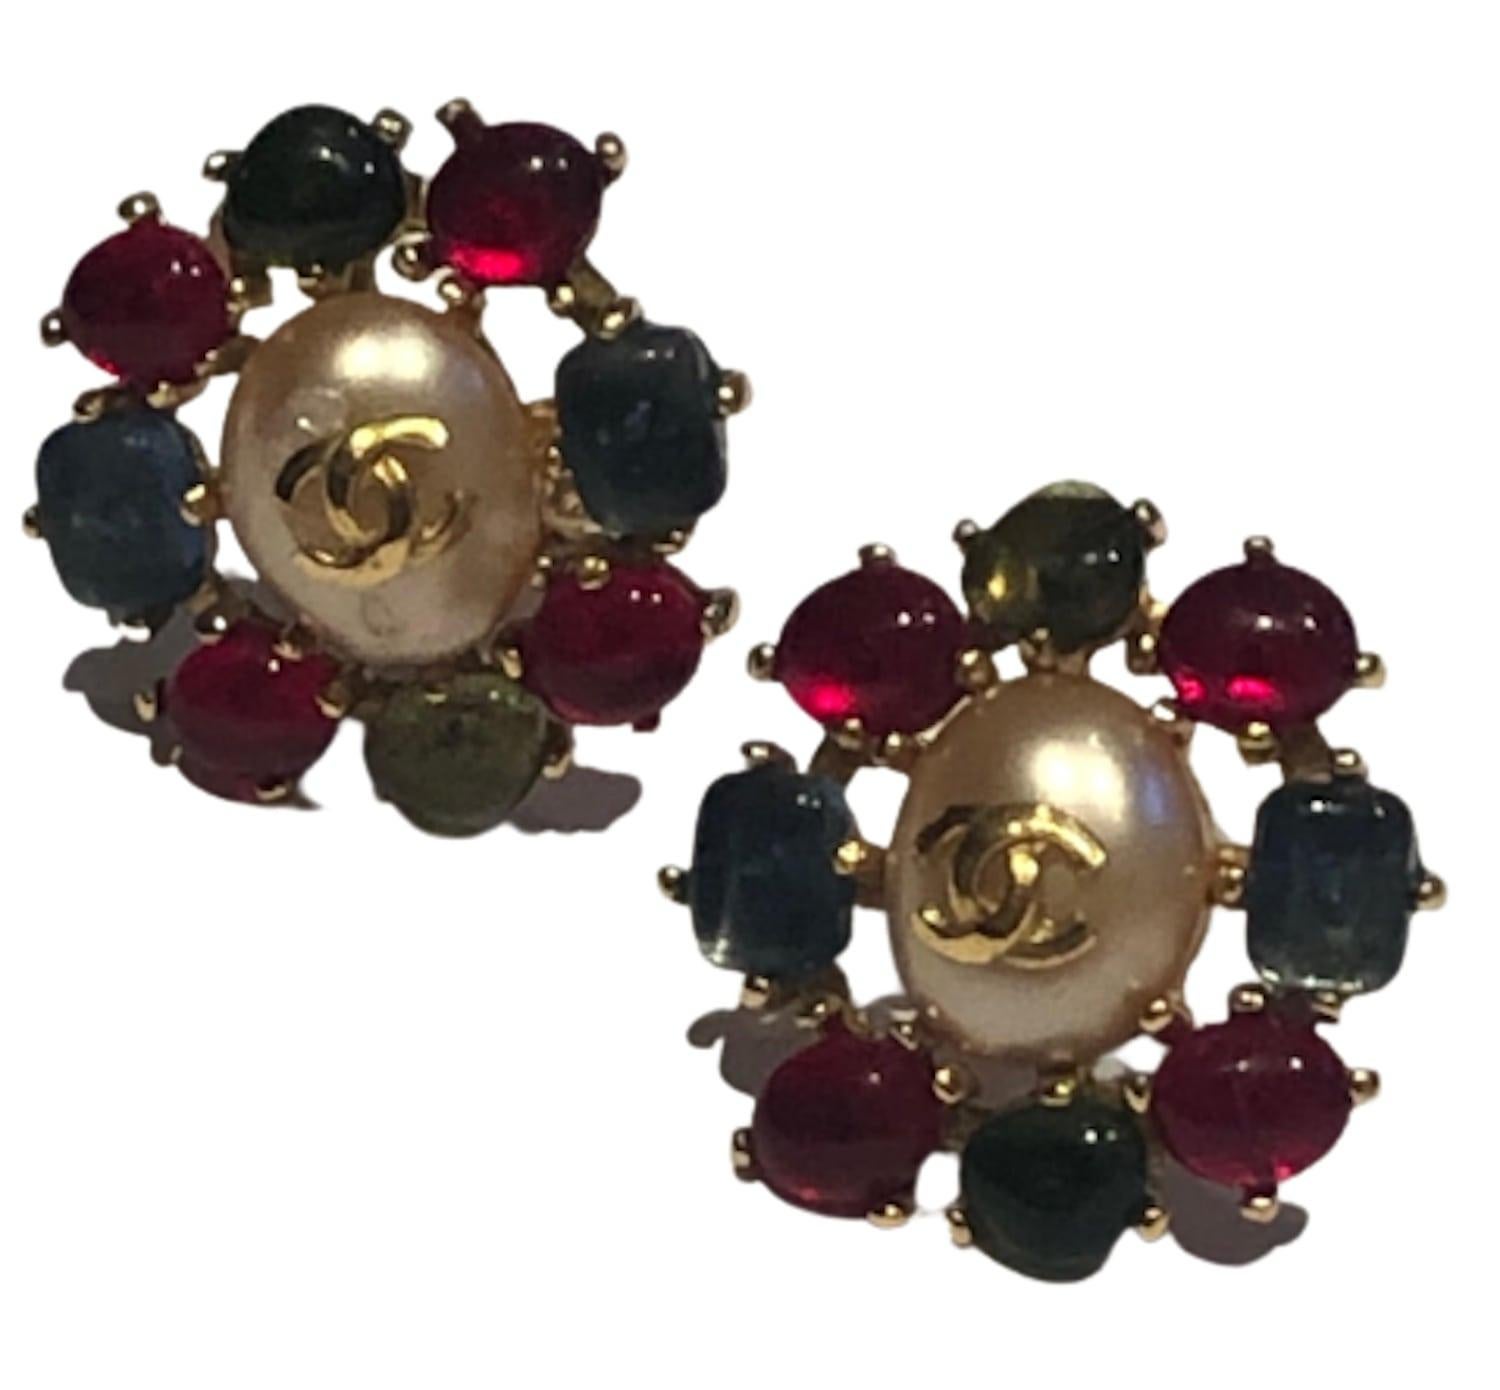 CHANEL Gripoix Earrings Vintage Red Green Blue Pearl CC logo Circa 1997
A stunning rare vintage Chanel Gripoix pearl CC clip-on earrings from Autumn 1997. These beautiful earrings are handcrafted with height Gripoix glass stones in green, blue and